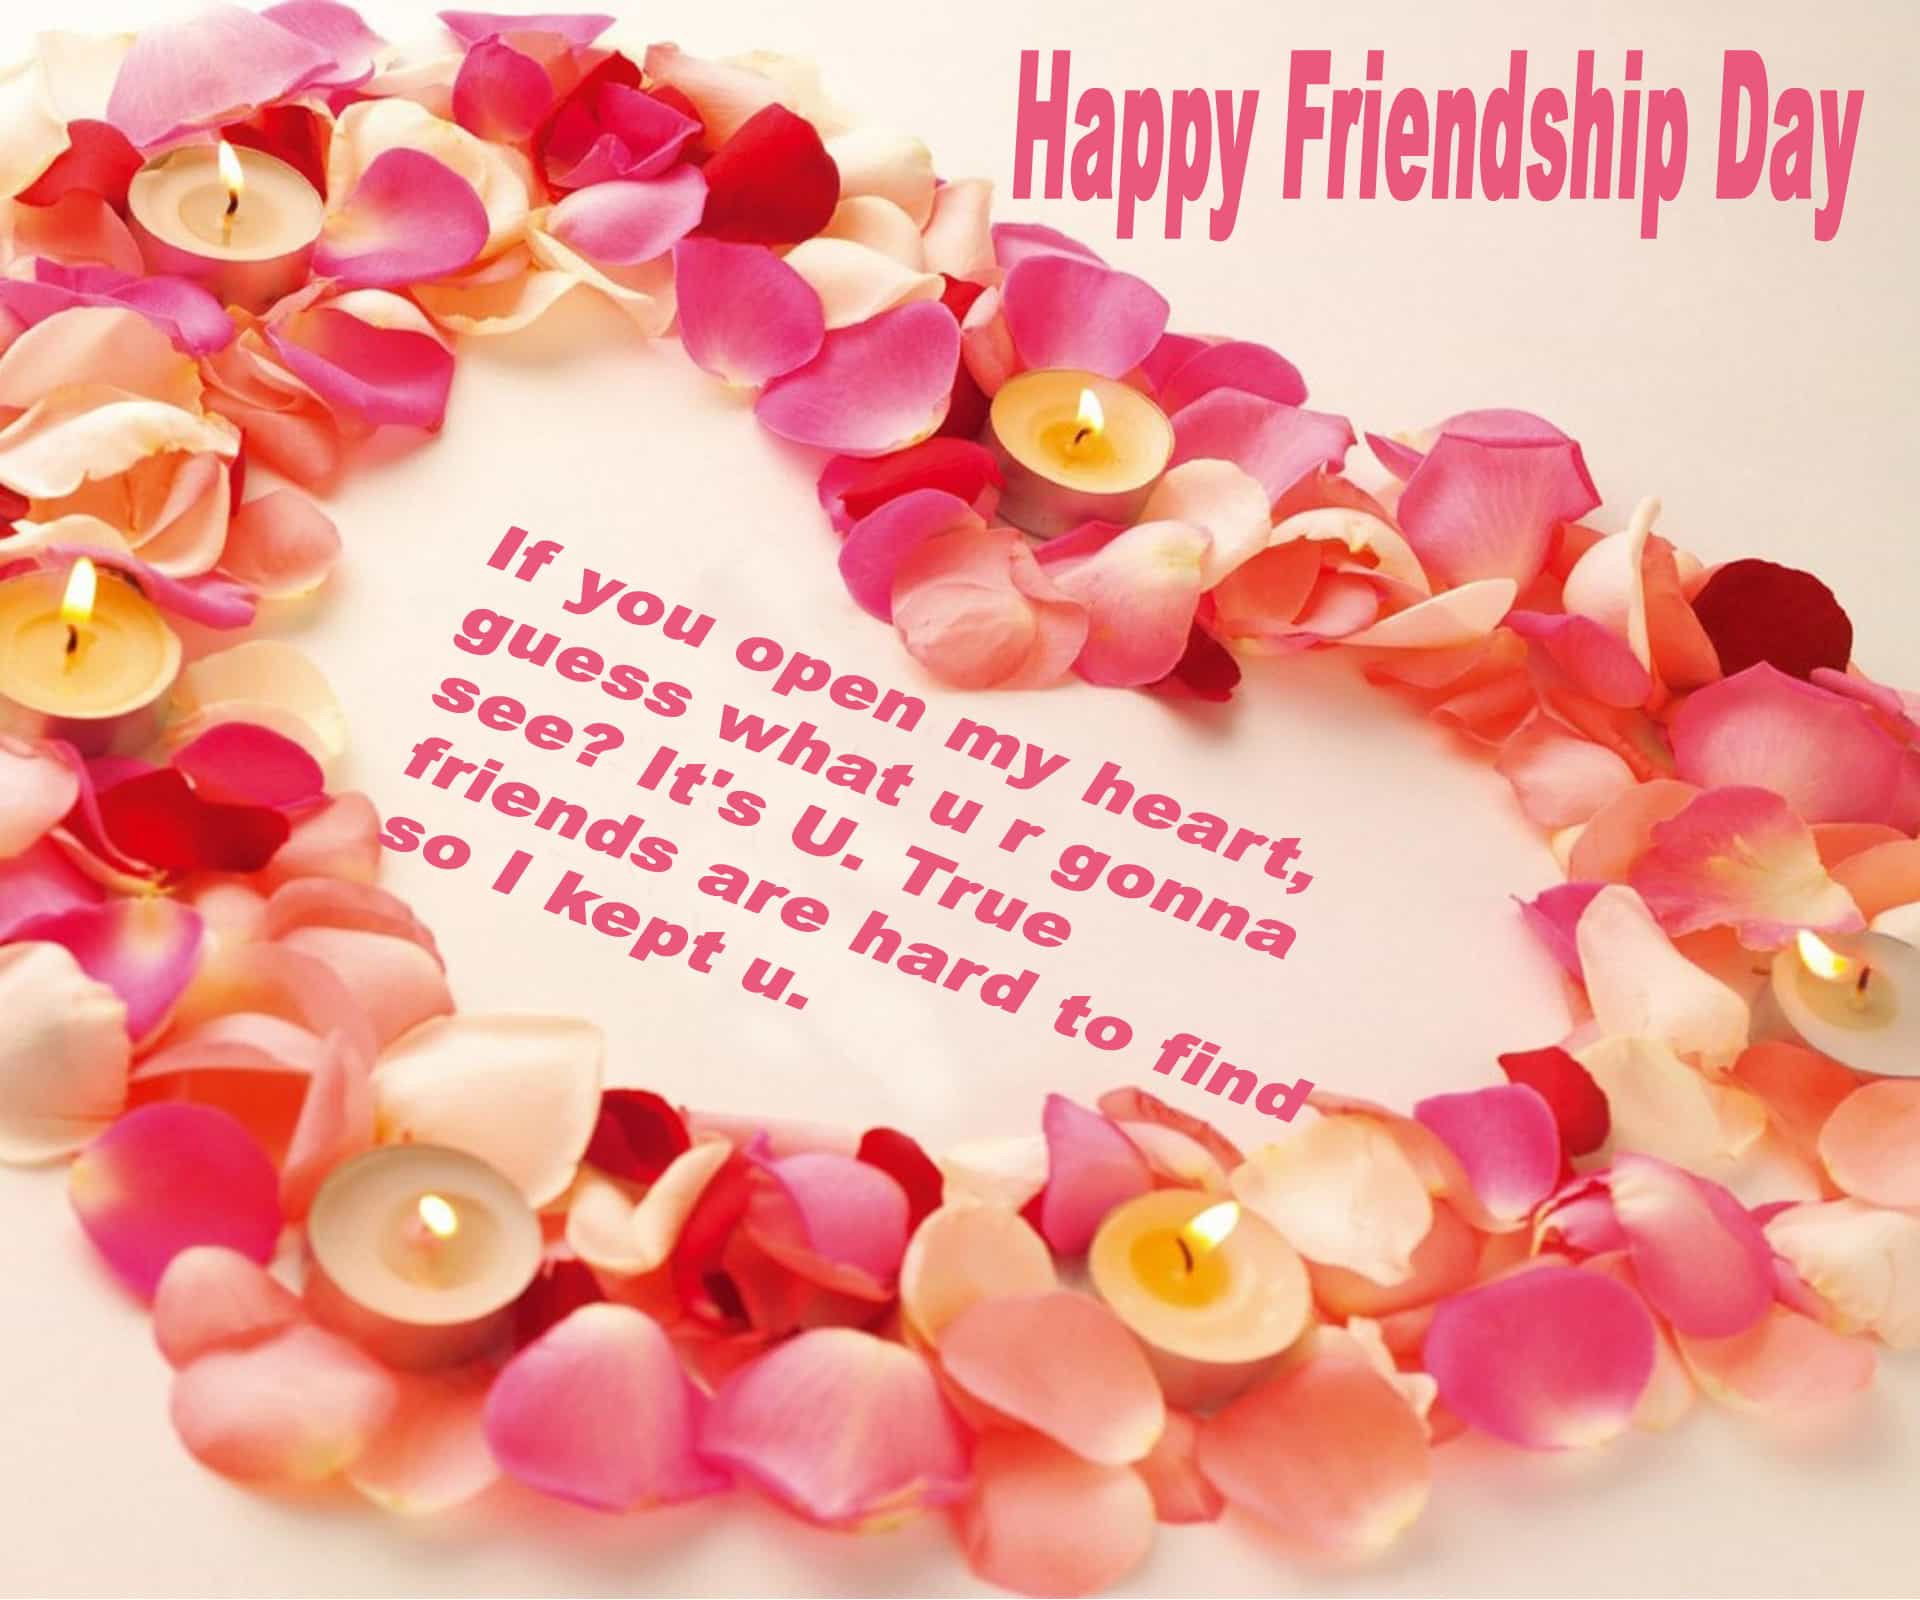 Happy Friendship Day Wallpaper (54 Picture)